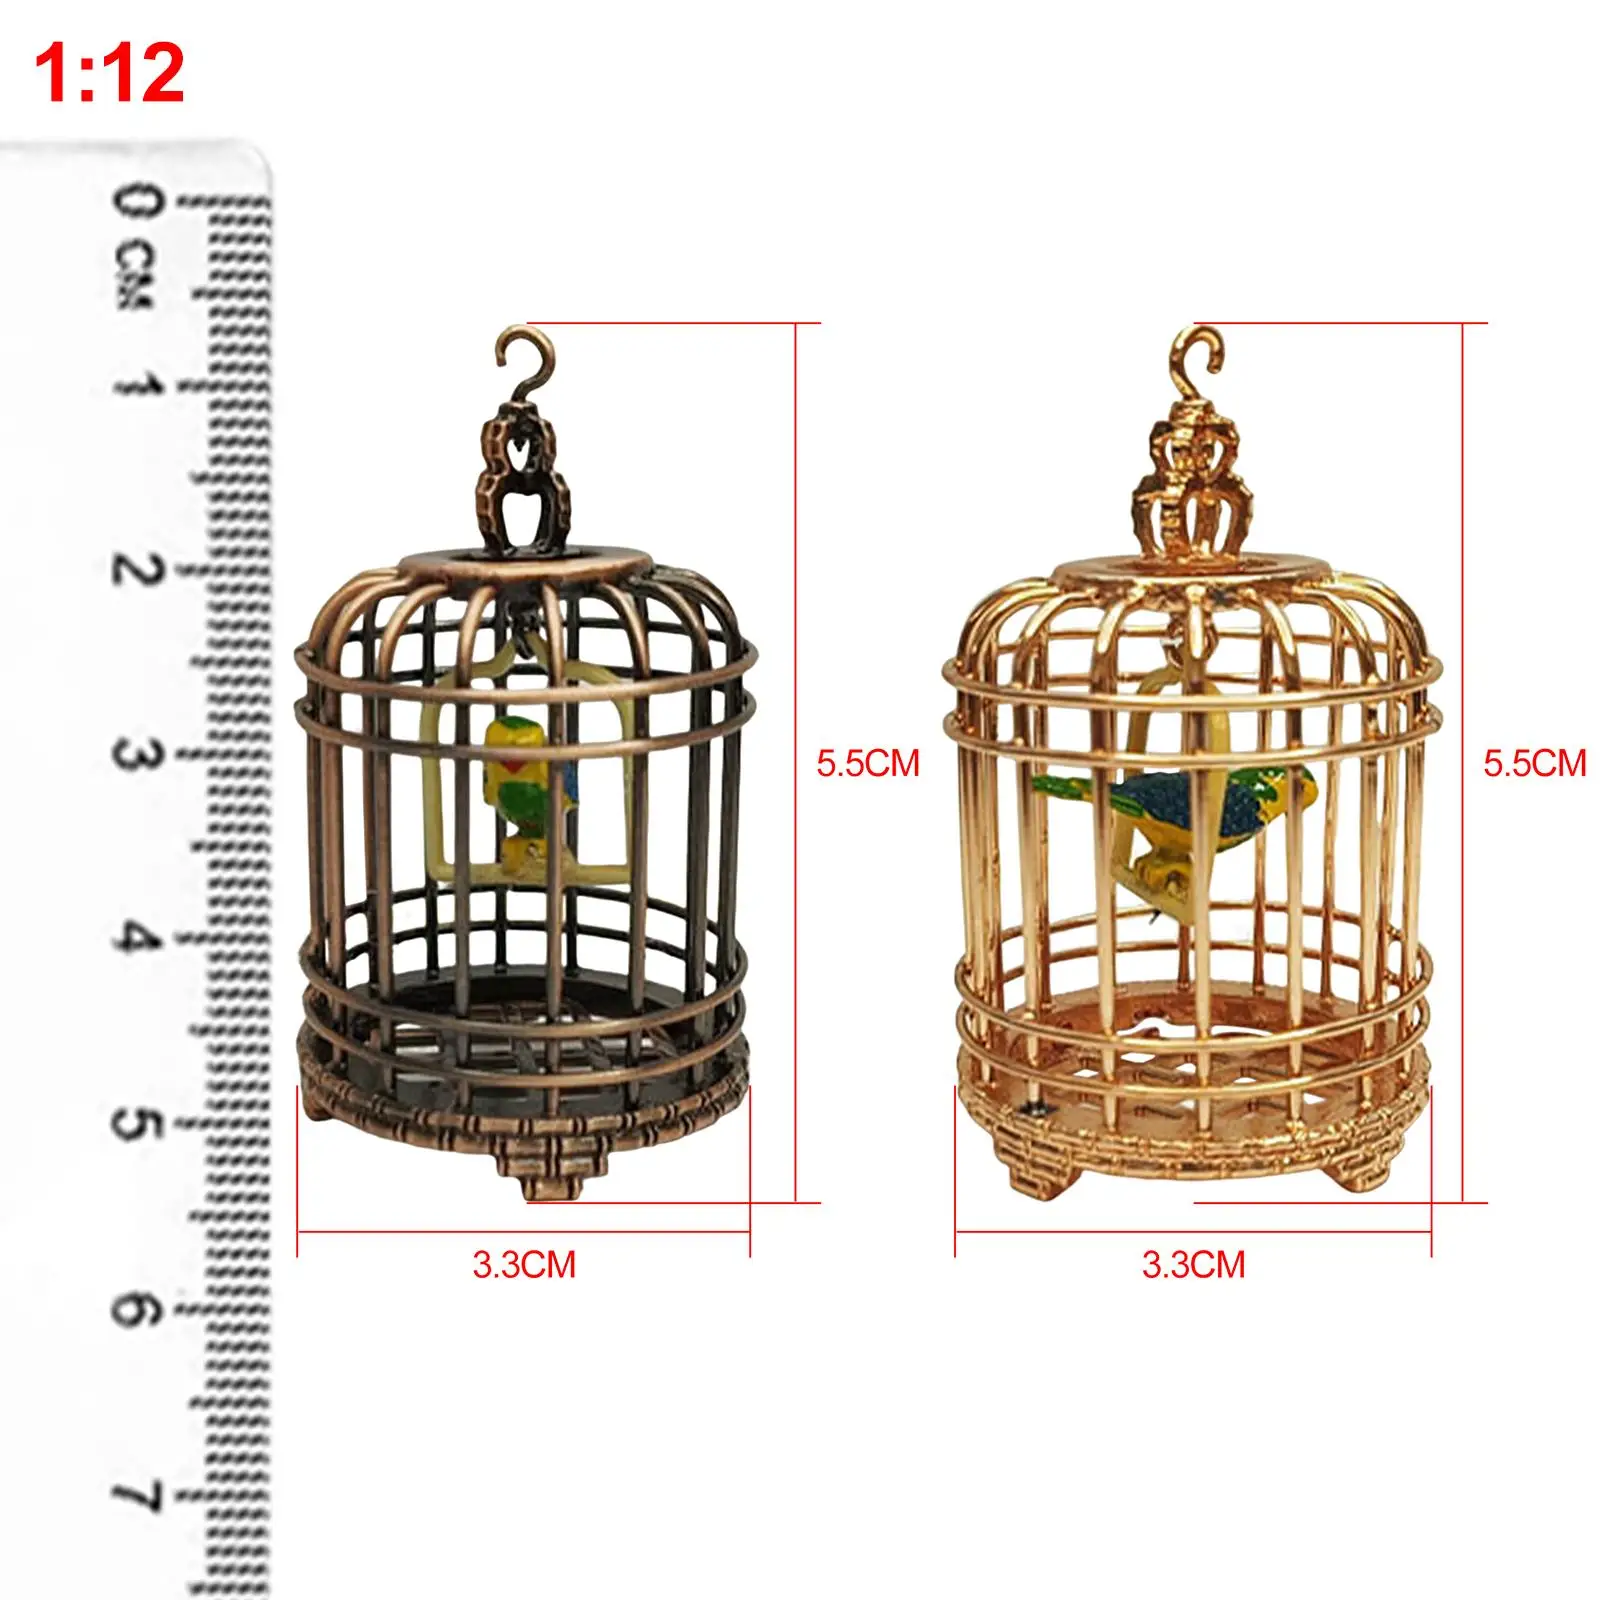 Simulation Birdcage, Miniature Dollhouse Bird Cage with Bird, Hanging Hook for